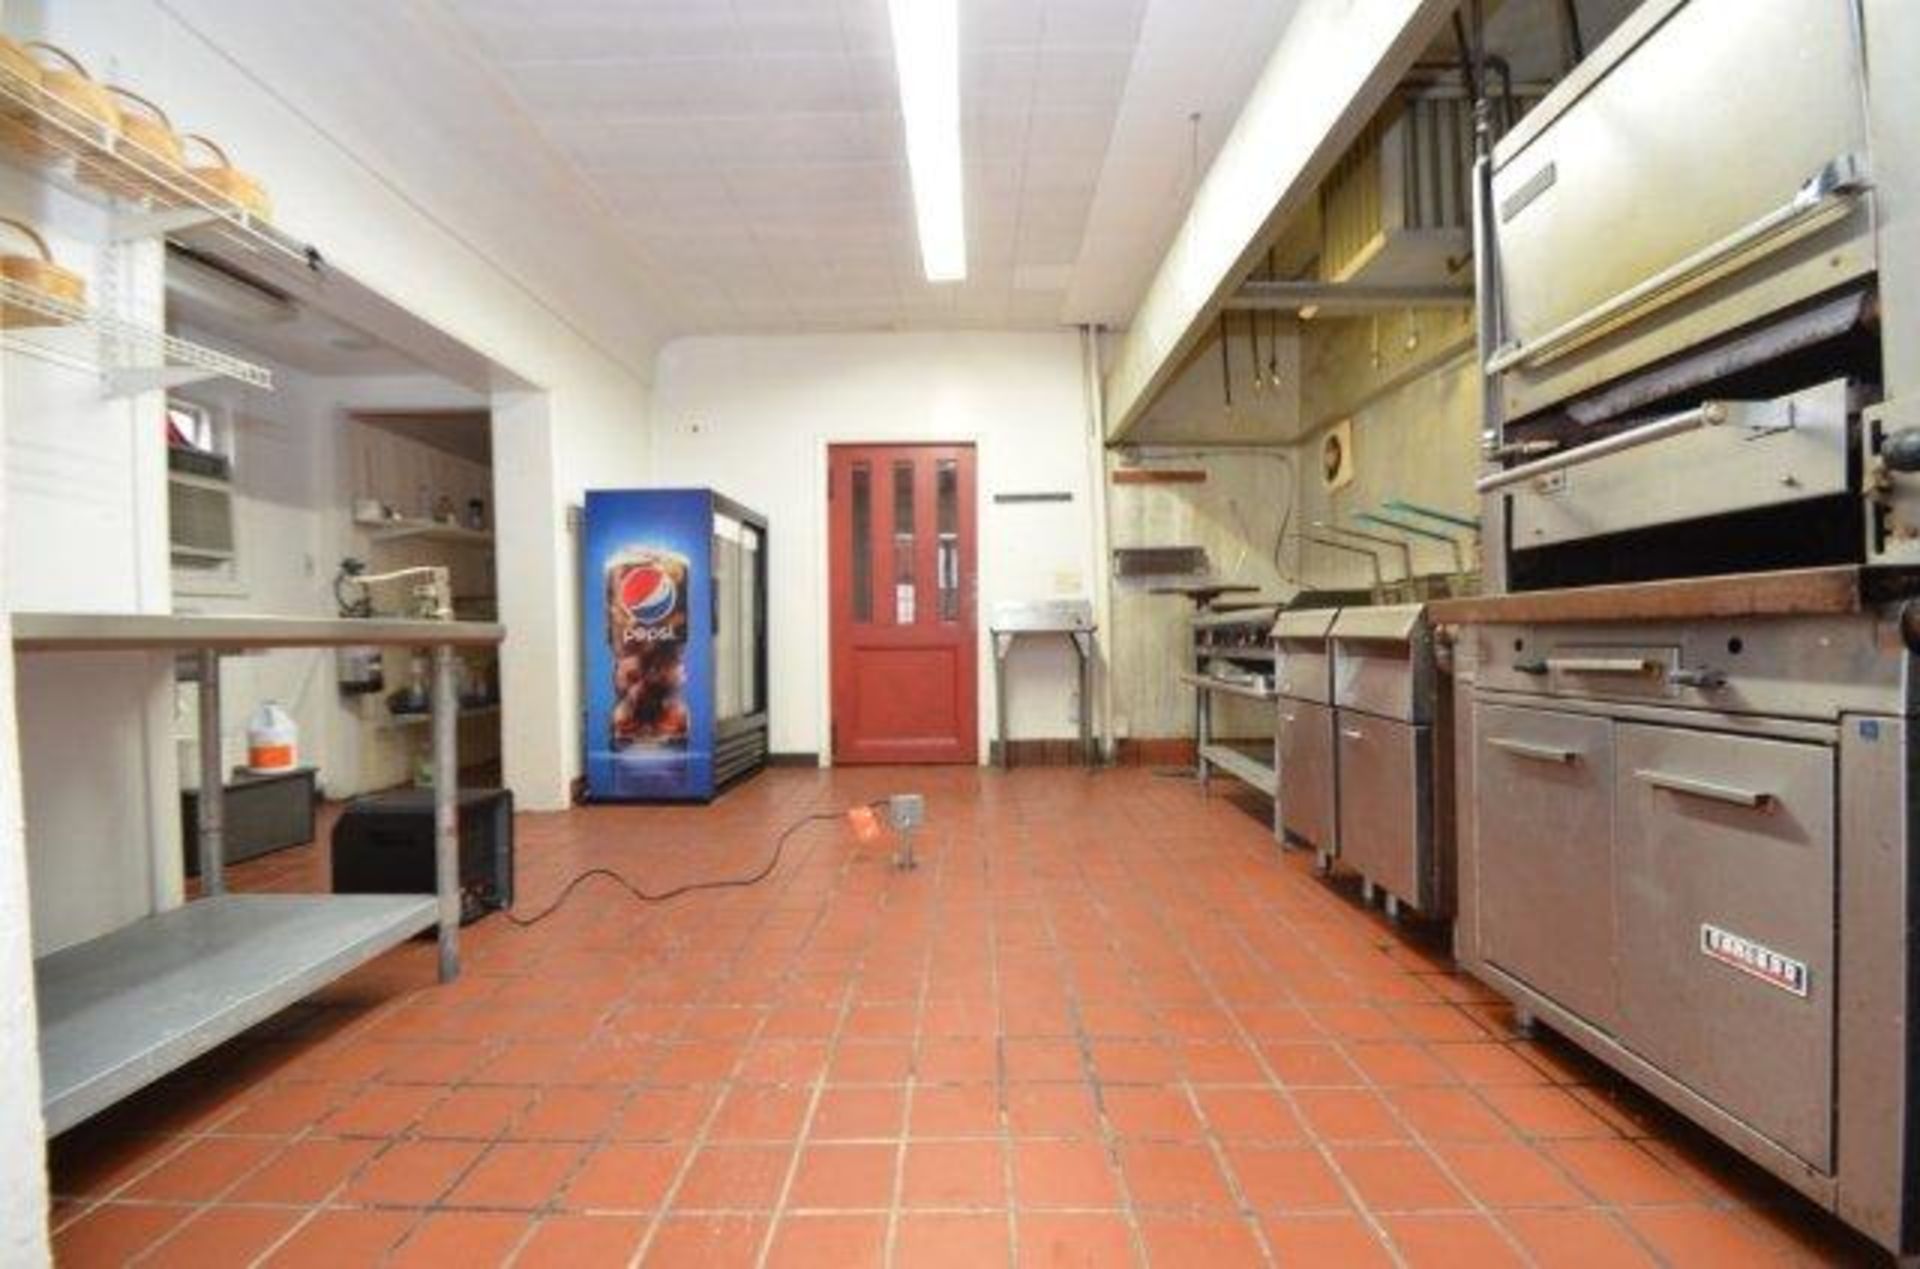 BULK BID: The Real Estate & Restaurant Equipment/Fixtures as a Whole. Lots 1 & 2. - Image 9 of 32